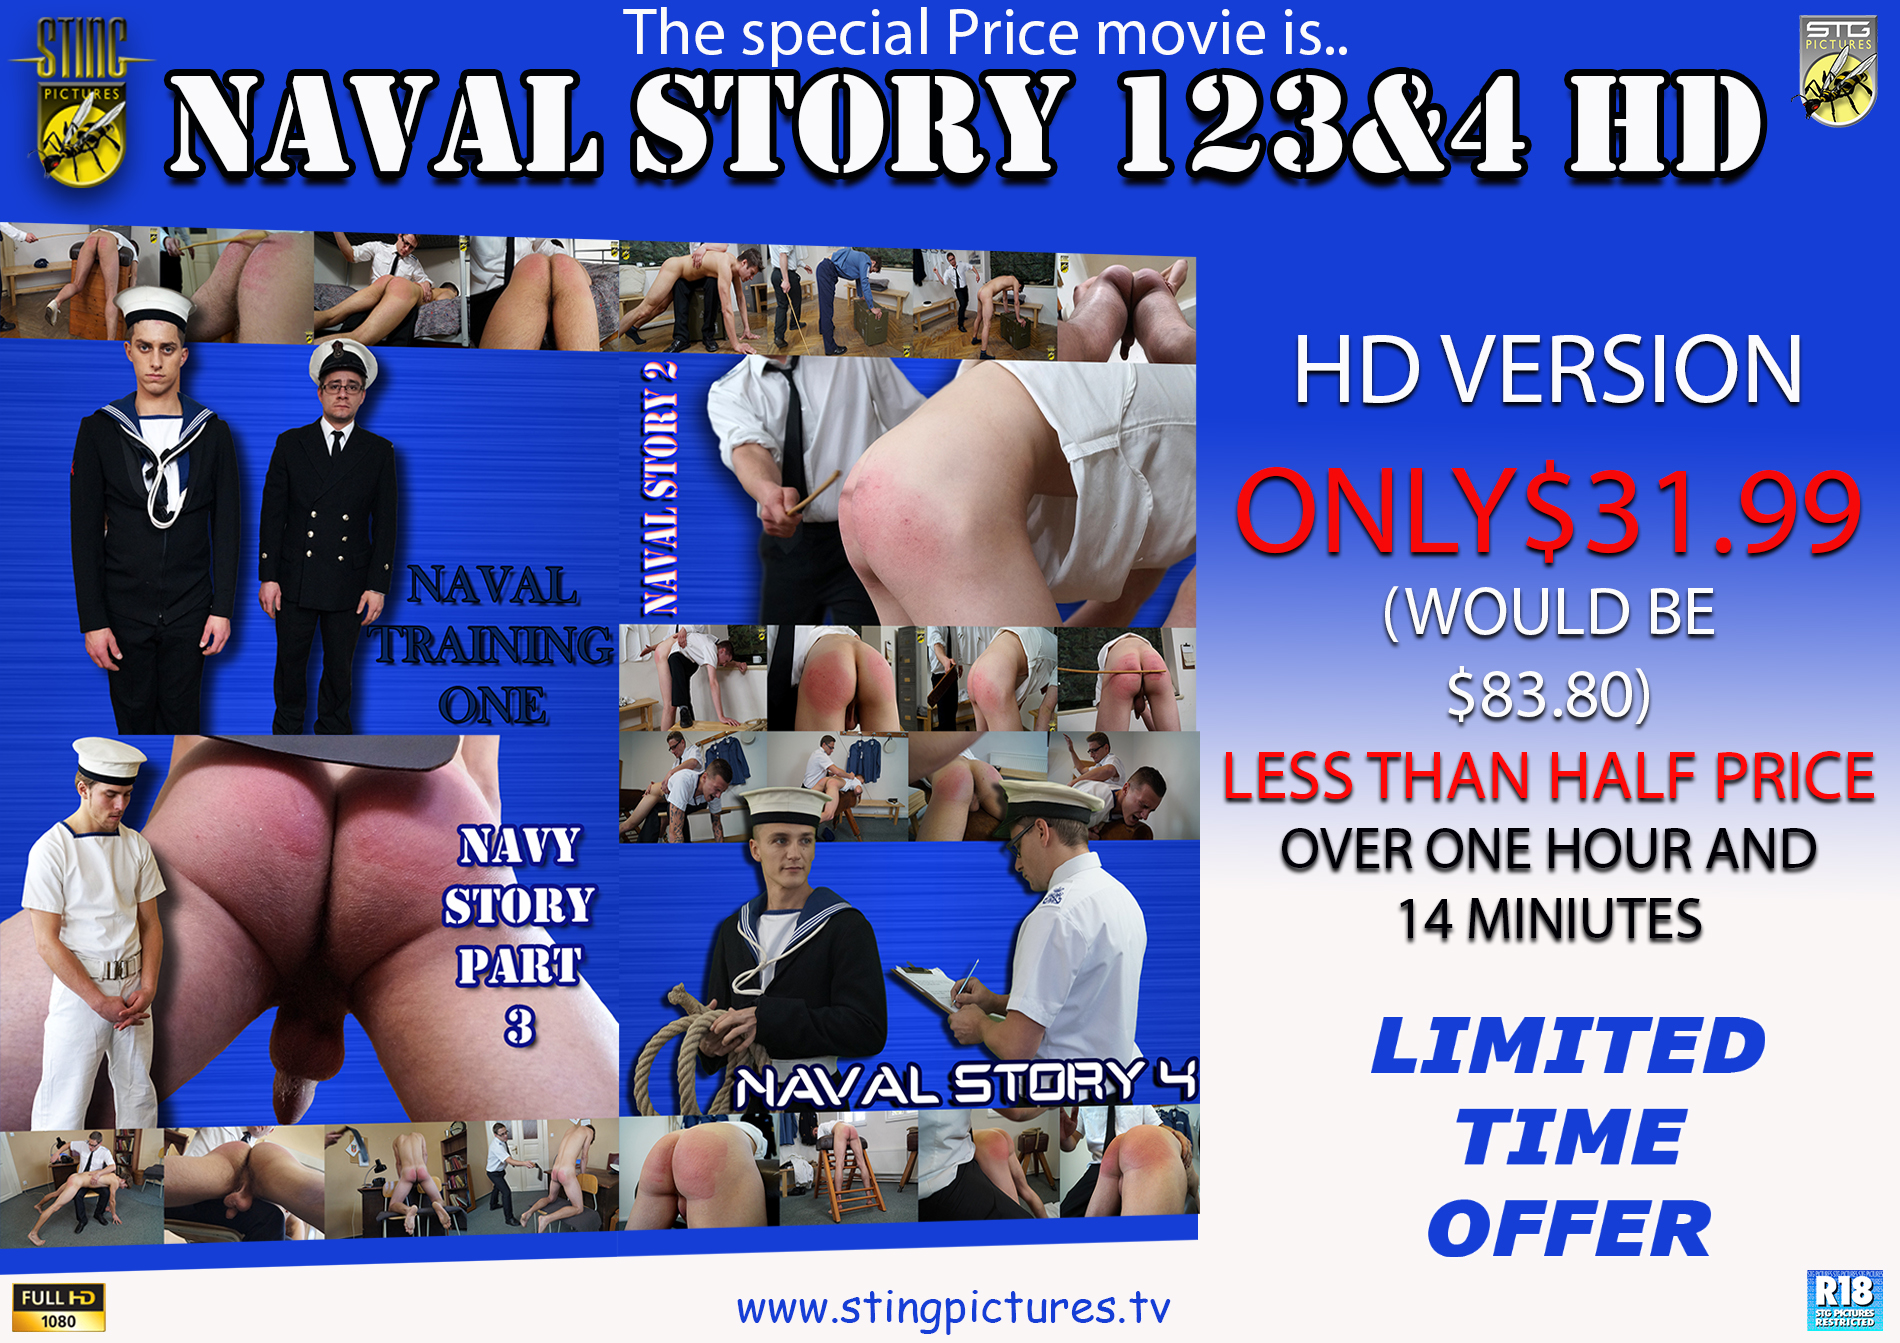 Sting Special Price Spanking Compilation Naval Story Parts 1, 2, 3 and 4 in HD